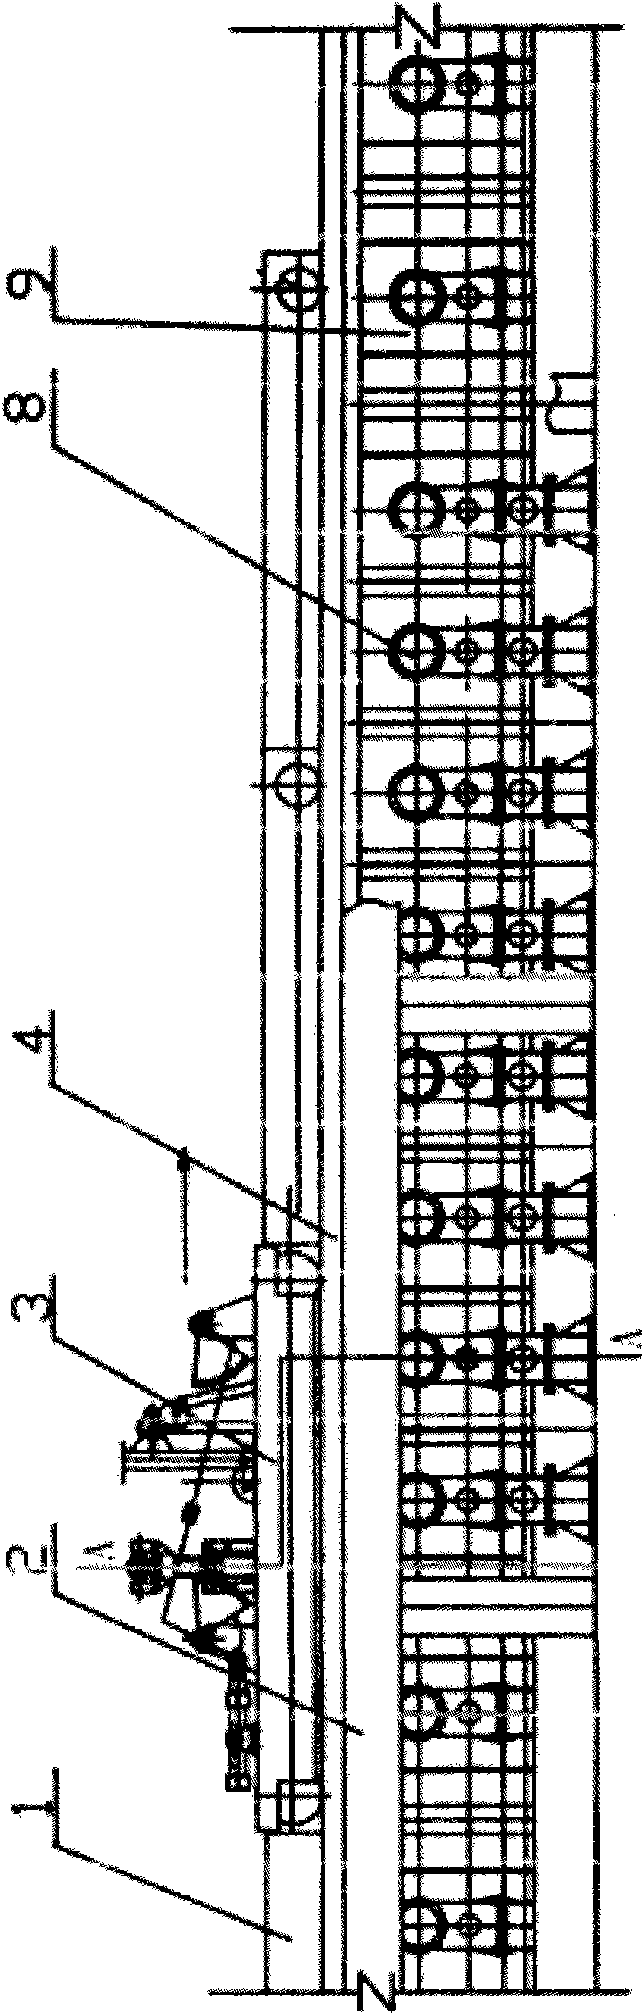 Flame cutting system with insulation device for flame cutting zone of billet